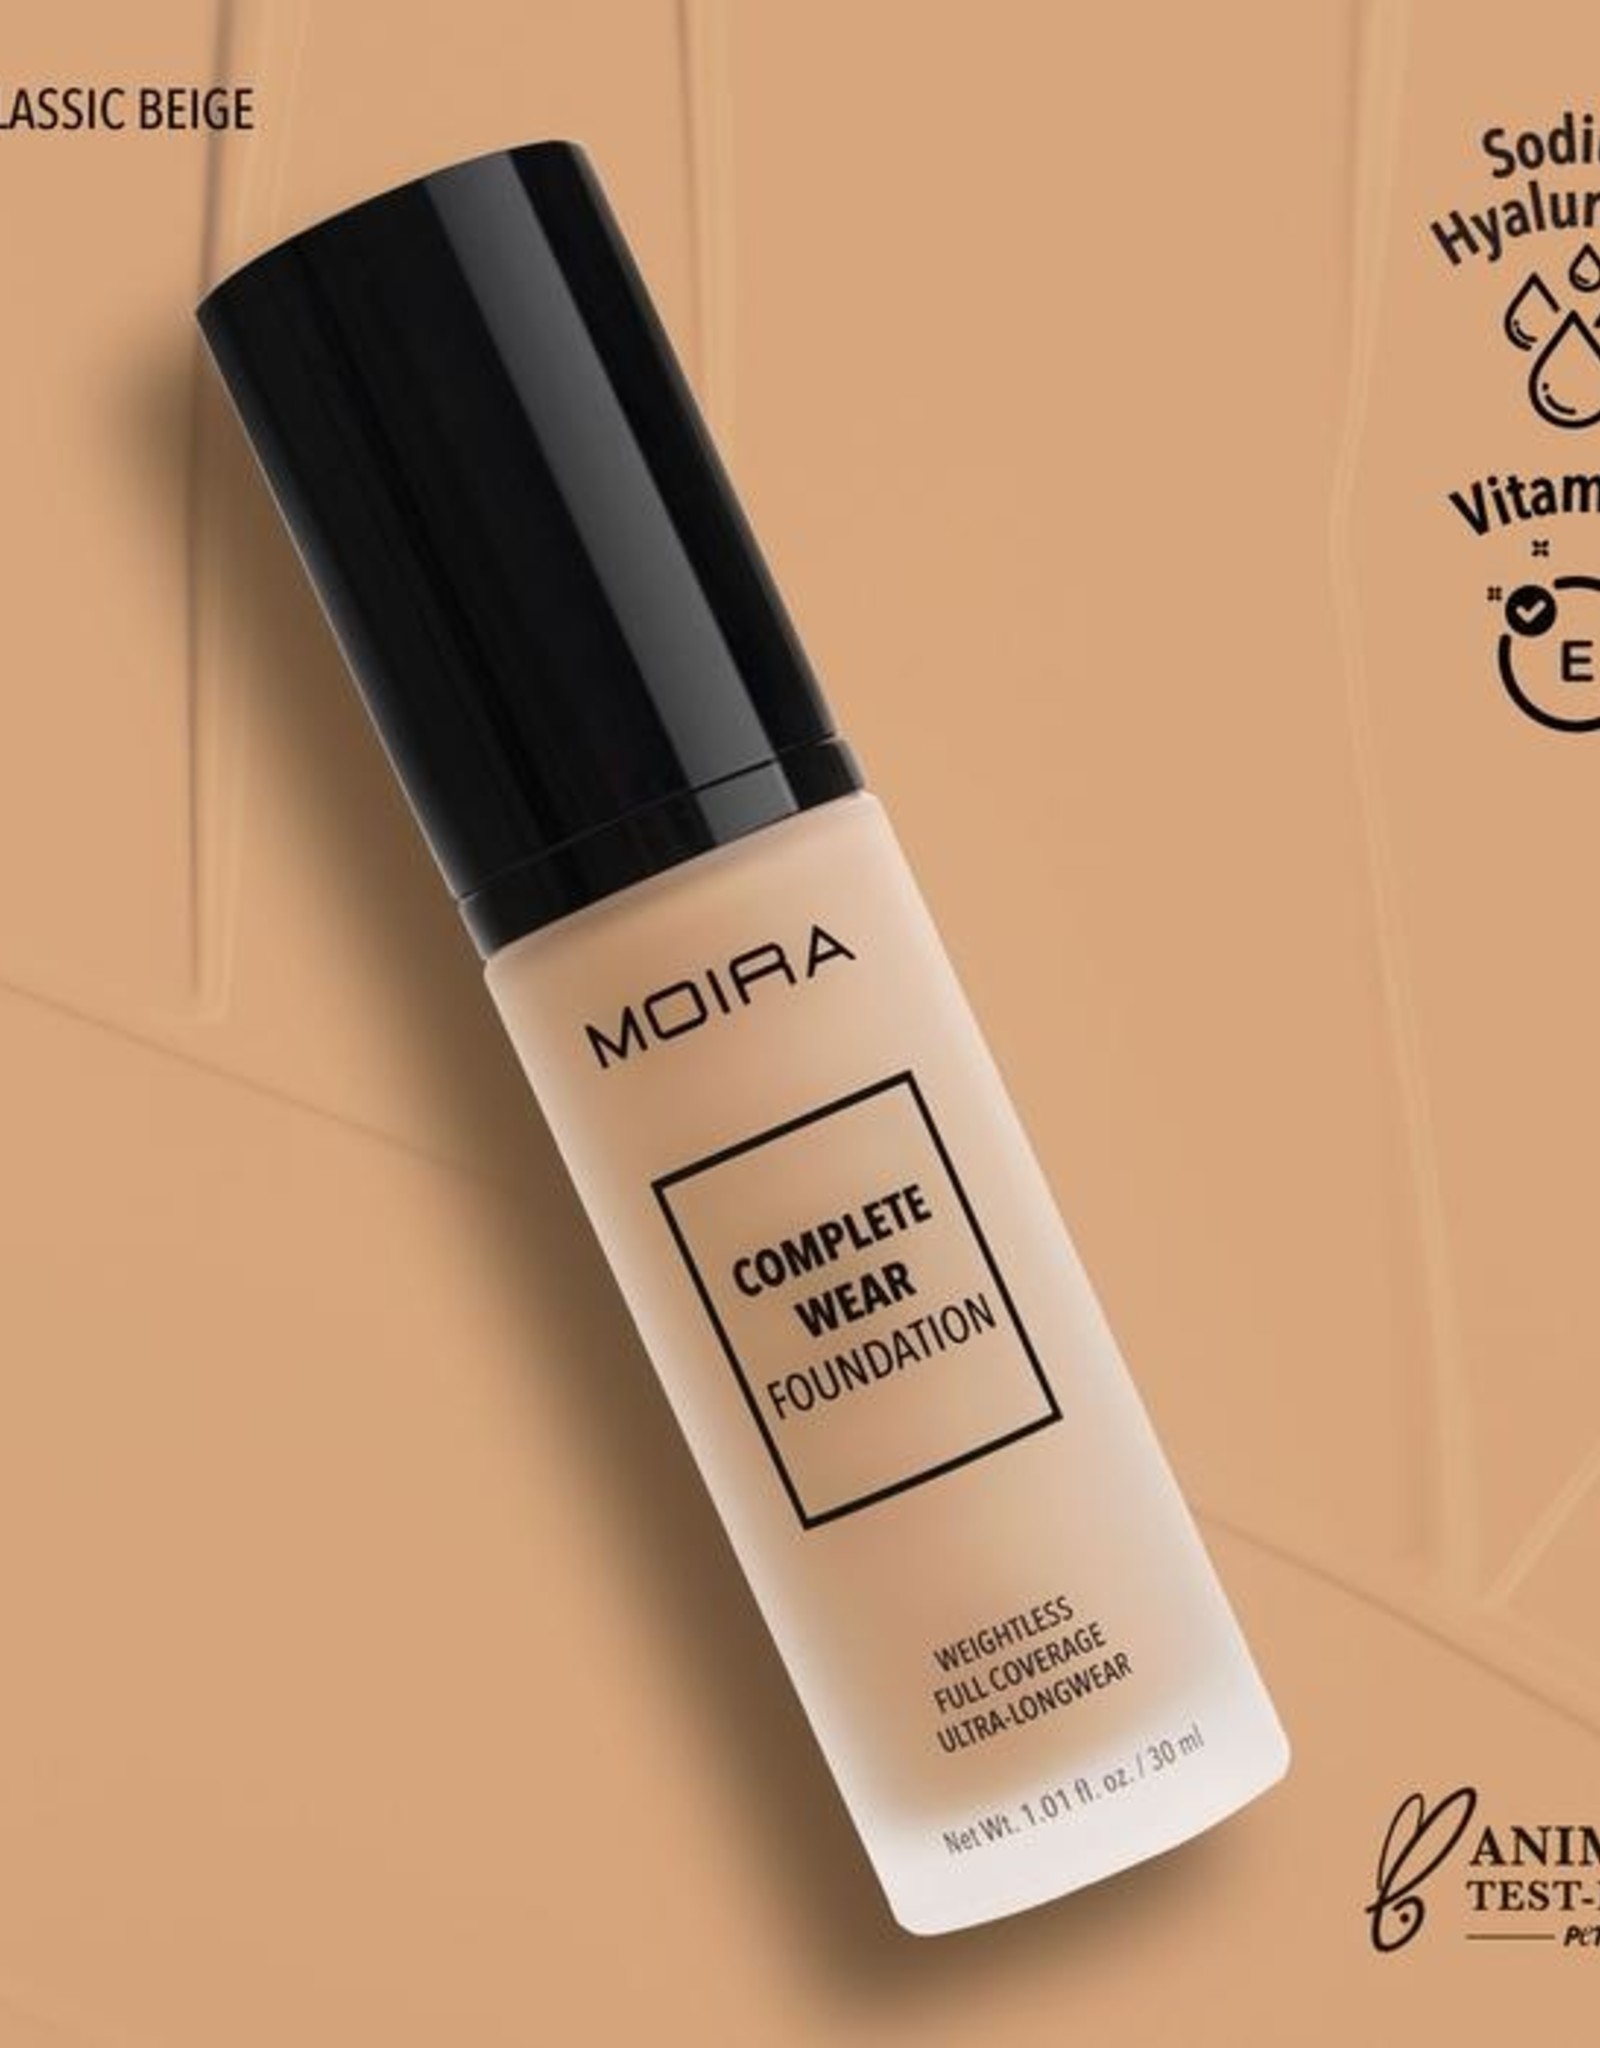 Moira Complete Wear Foundation 350 Classic Beige